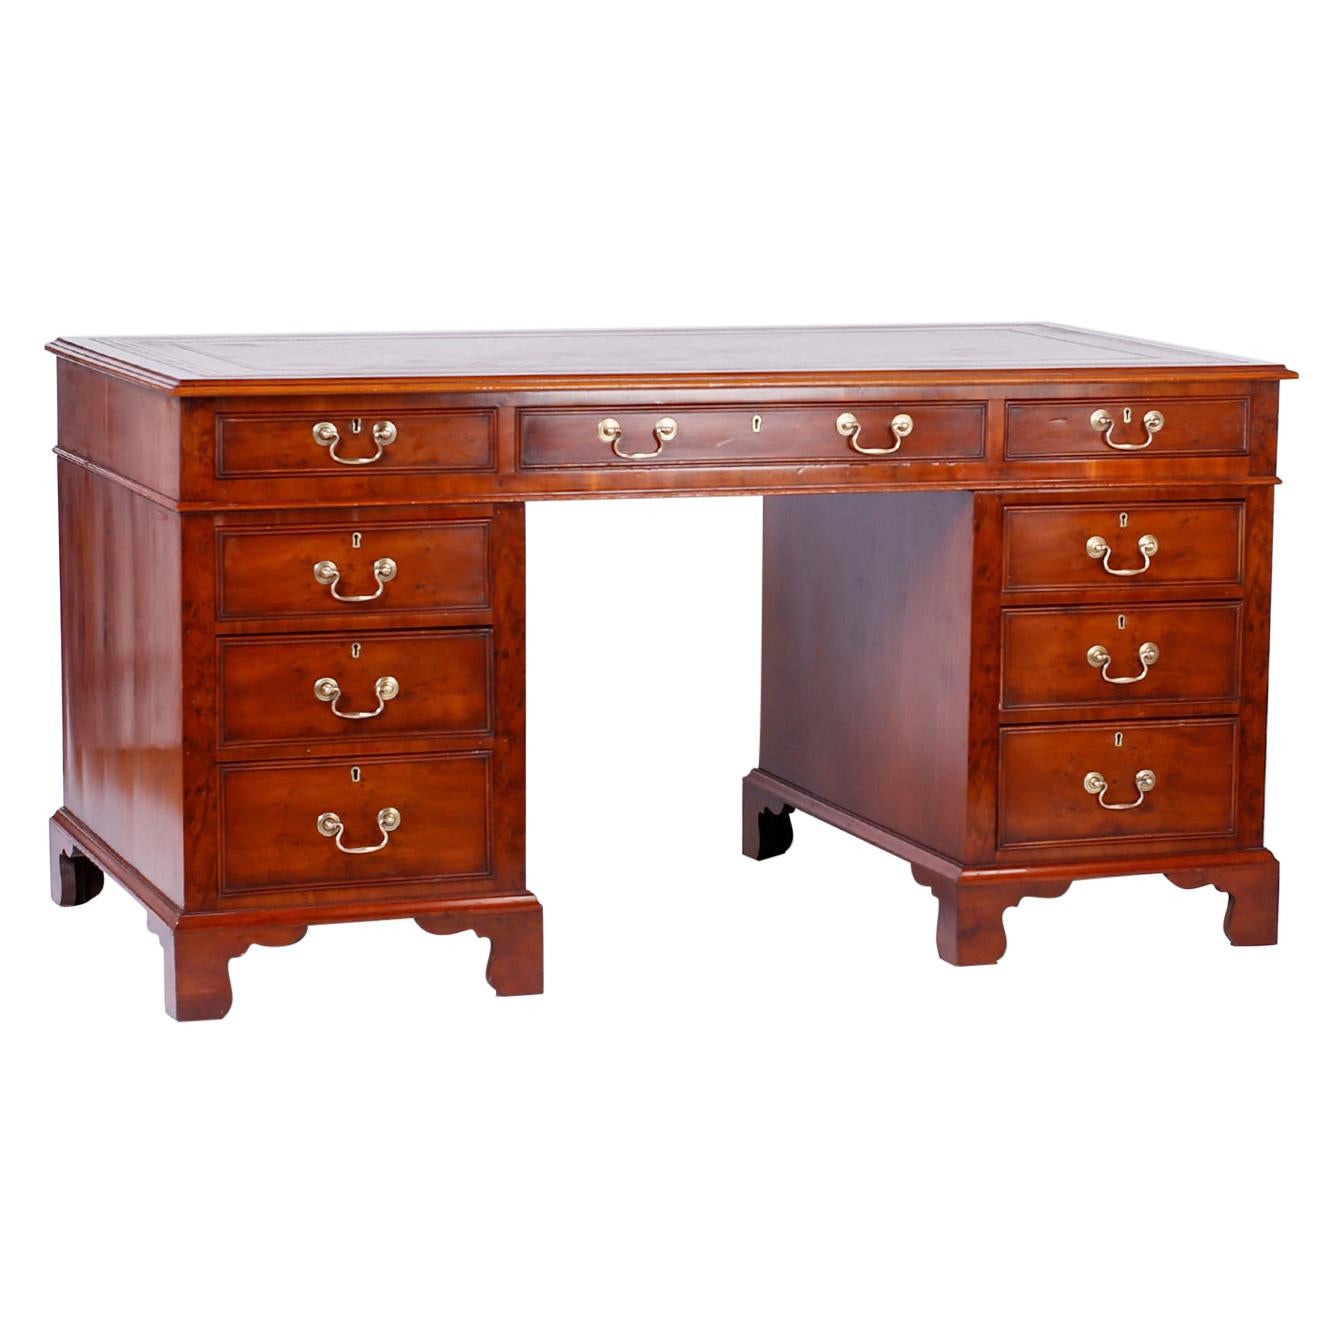 English Yew Wood Leather Top Desk For Sale